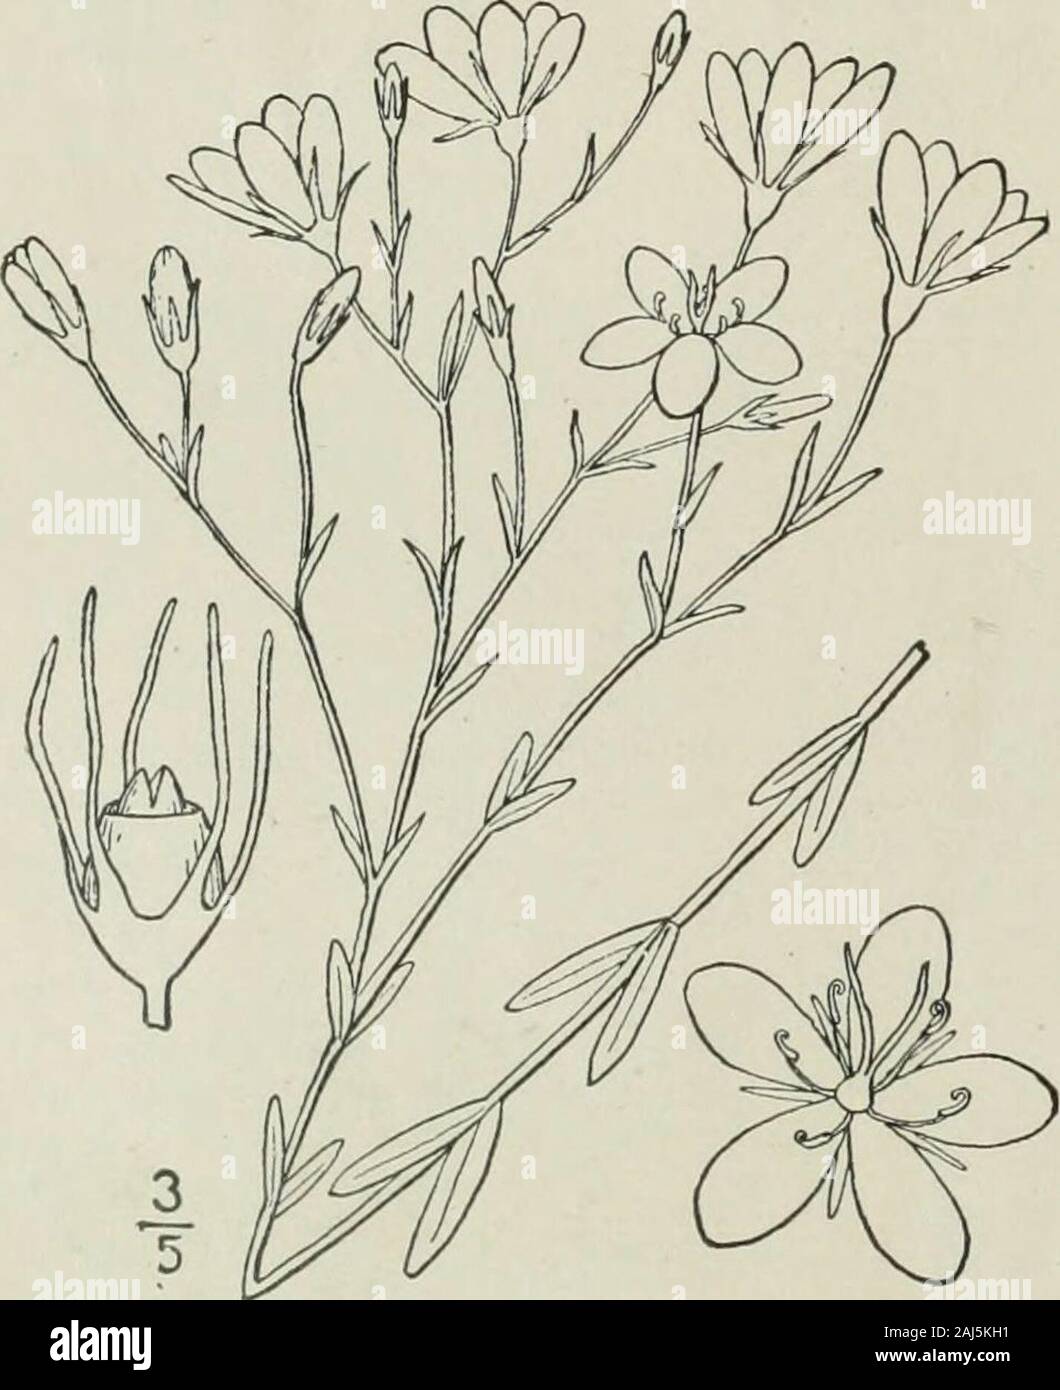 An illustrated flora of the northern United States, Canada and the British possessions : from Newfoundland to the parallel of the southern boundary of Virginia and from the Atlantic Ocean westward to the 102nd meridian . 8. Sabbatia Elliottii Stend. ElliottsSabbatia. Fig. 3343. Sivertia difformis L. Sp. PI. 226. 1753? Sabbatia paniculata Ell. Eot. S. C. & Ga. i: 282.1817. Not Pursh, 1S14. S. Elliottii Steud. Nomencl. Ed. 2, 2: 489. 1841. Stempaniculately branched, terete or slightlyridged, i°-2° high, the branches alternate.Lower leaves obovate or lanceolate-oblong,obtuse, 6-g long, the upper Stock Photo